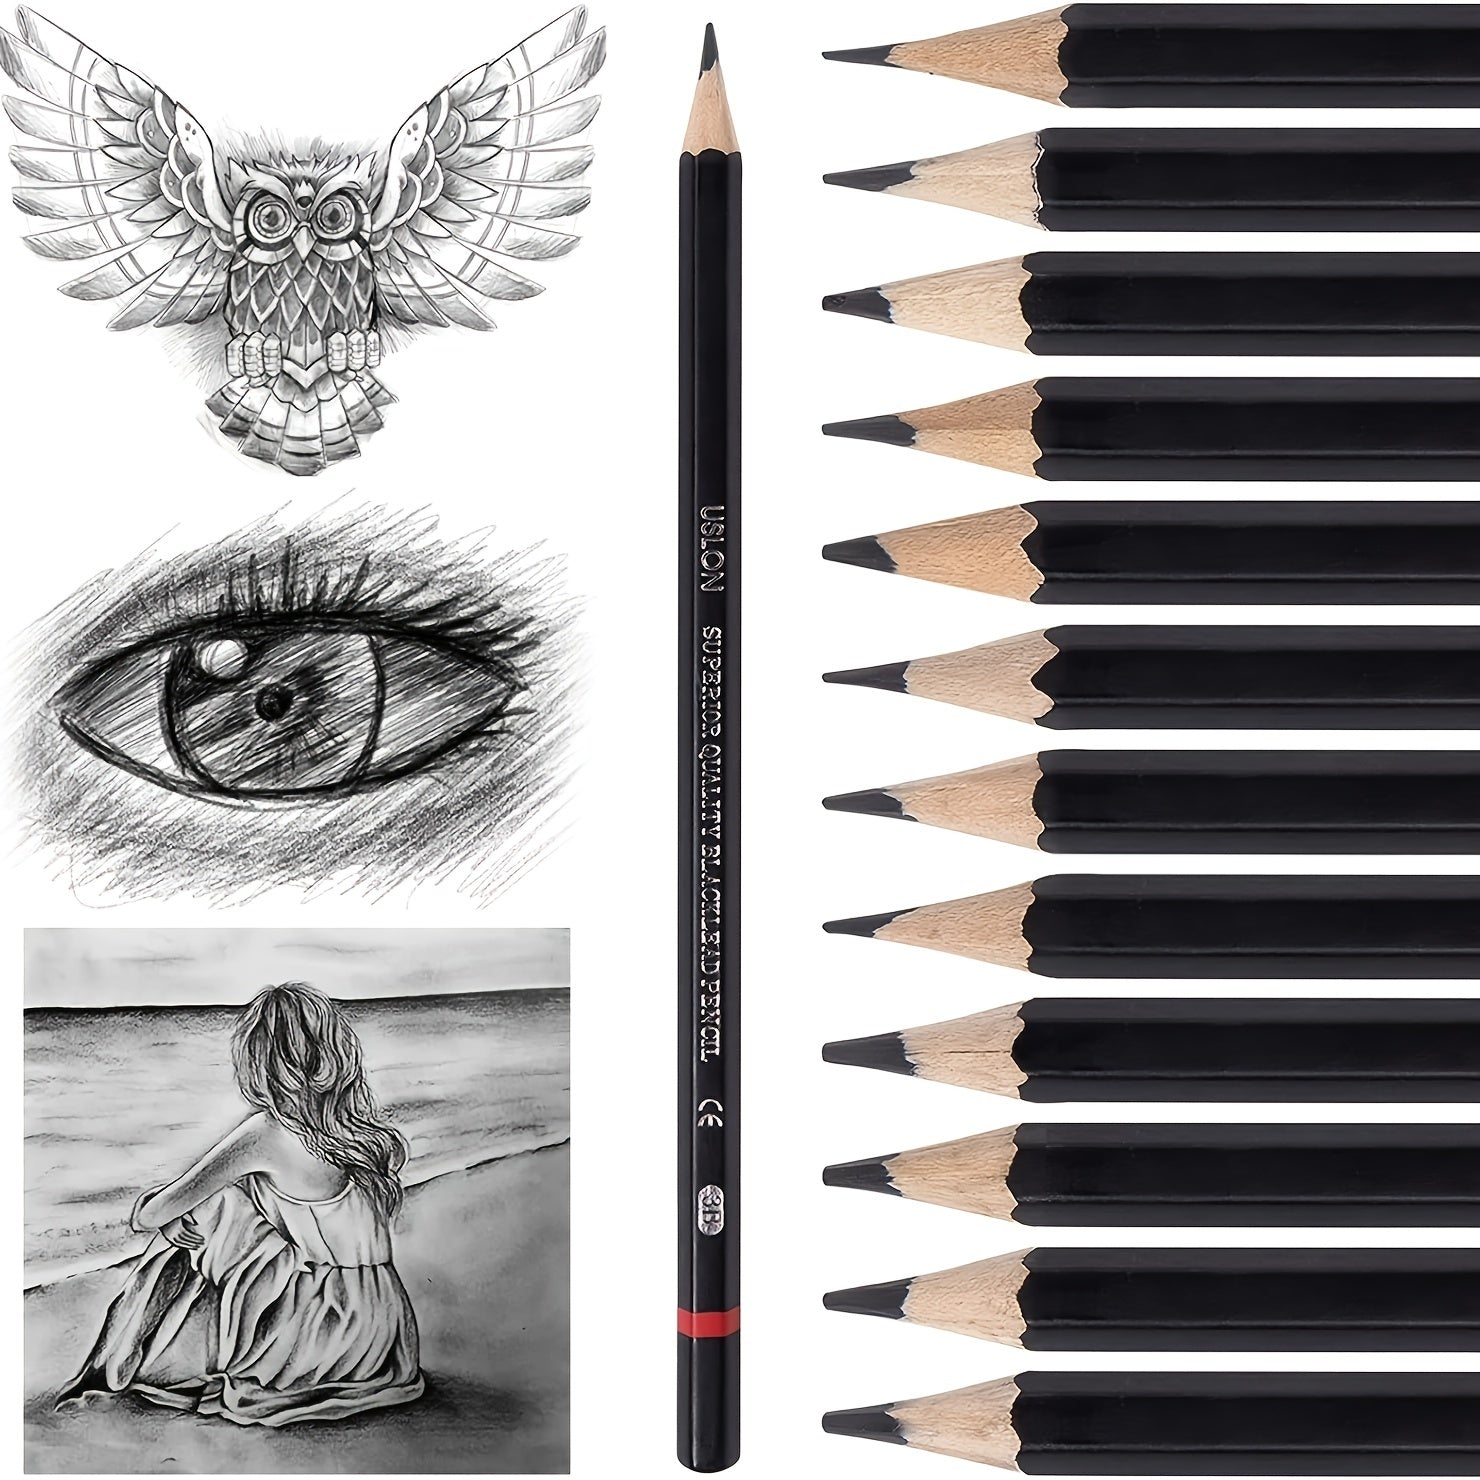 12pcs Art Drawing Graphite Pencils(8B - 2H), Professional Drawing Sketching Pencil Set, Ideal For Drawing Art, Sketching, Shading, For Beginners & Pro Artists